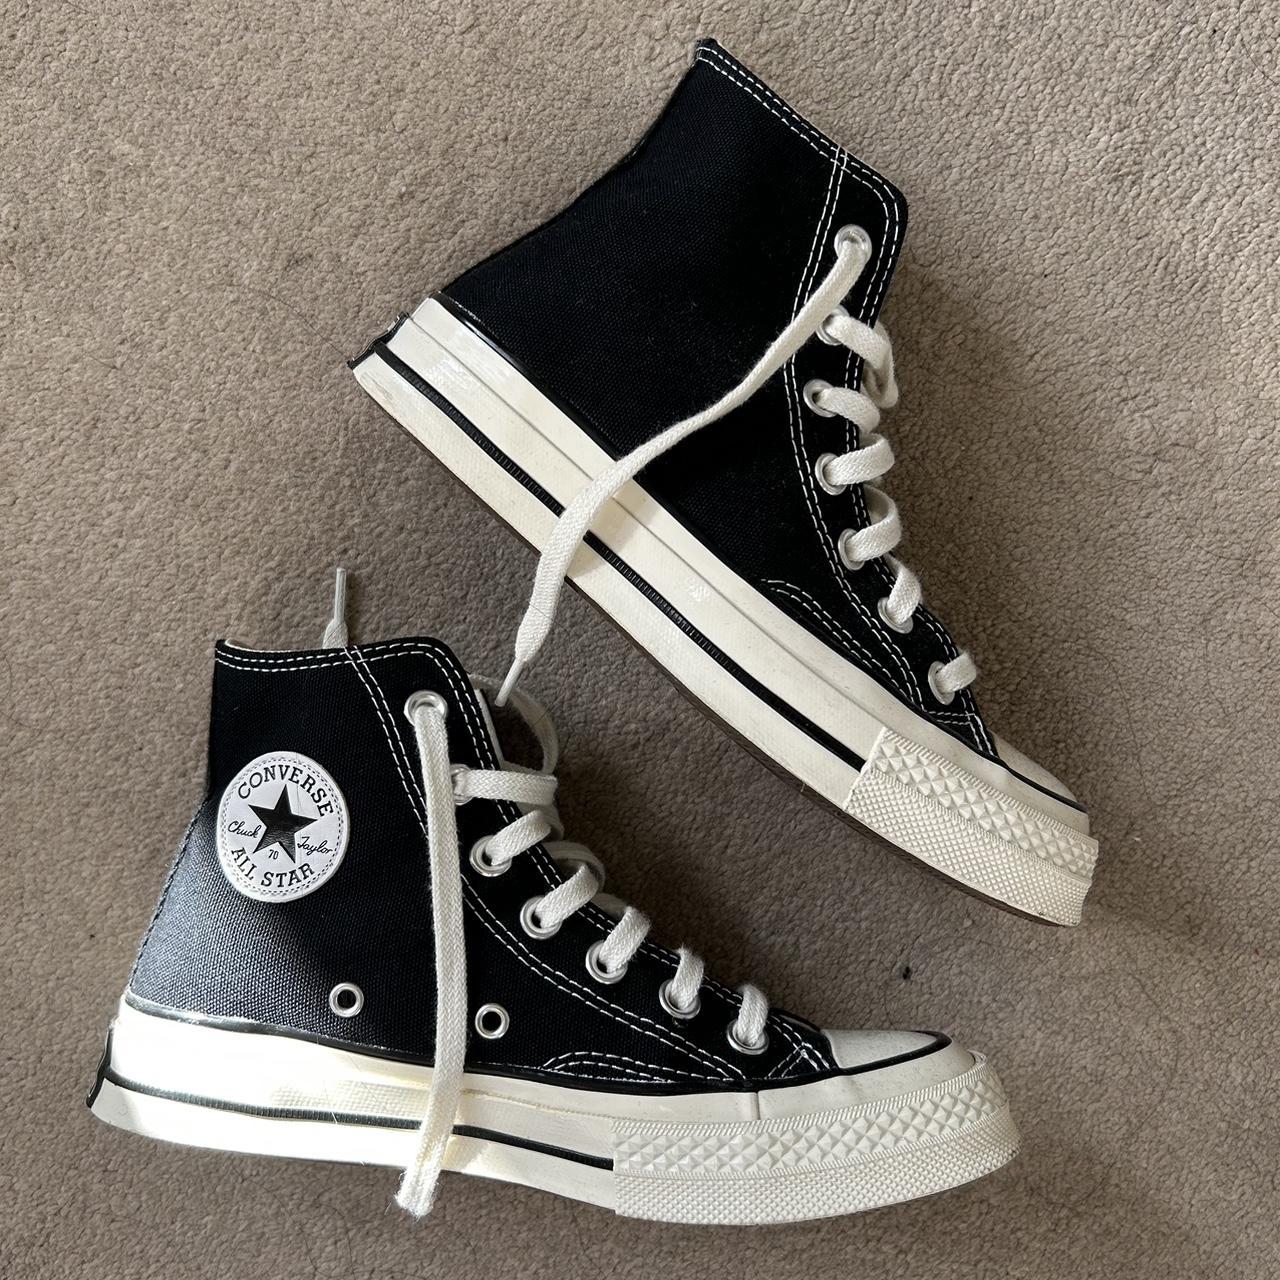 Converse Women's Black and White Trainers | Depop